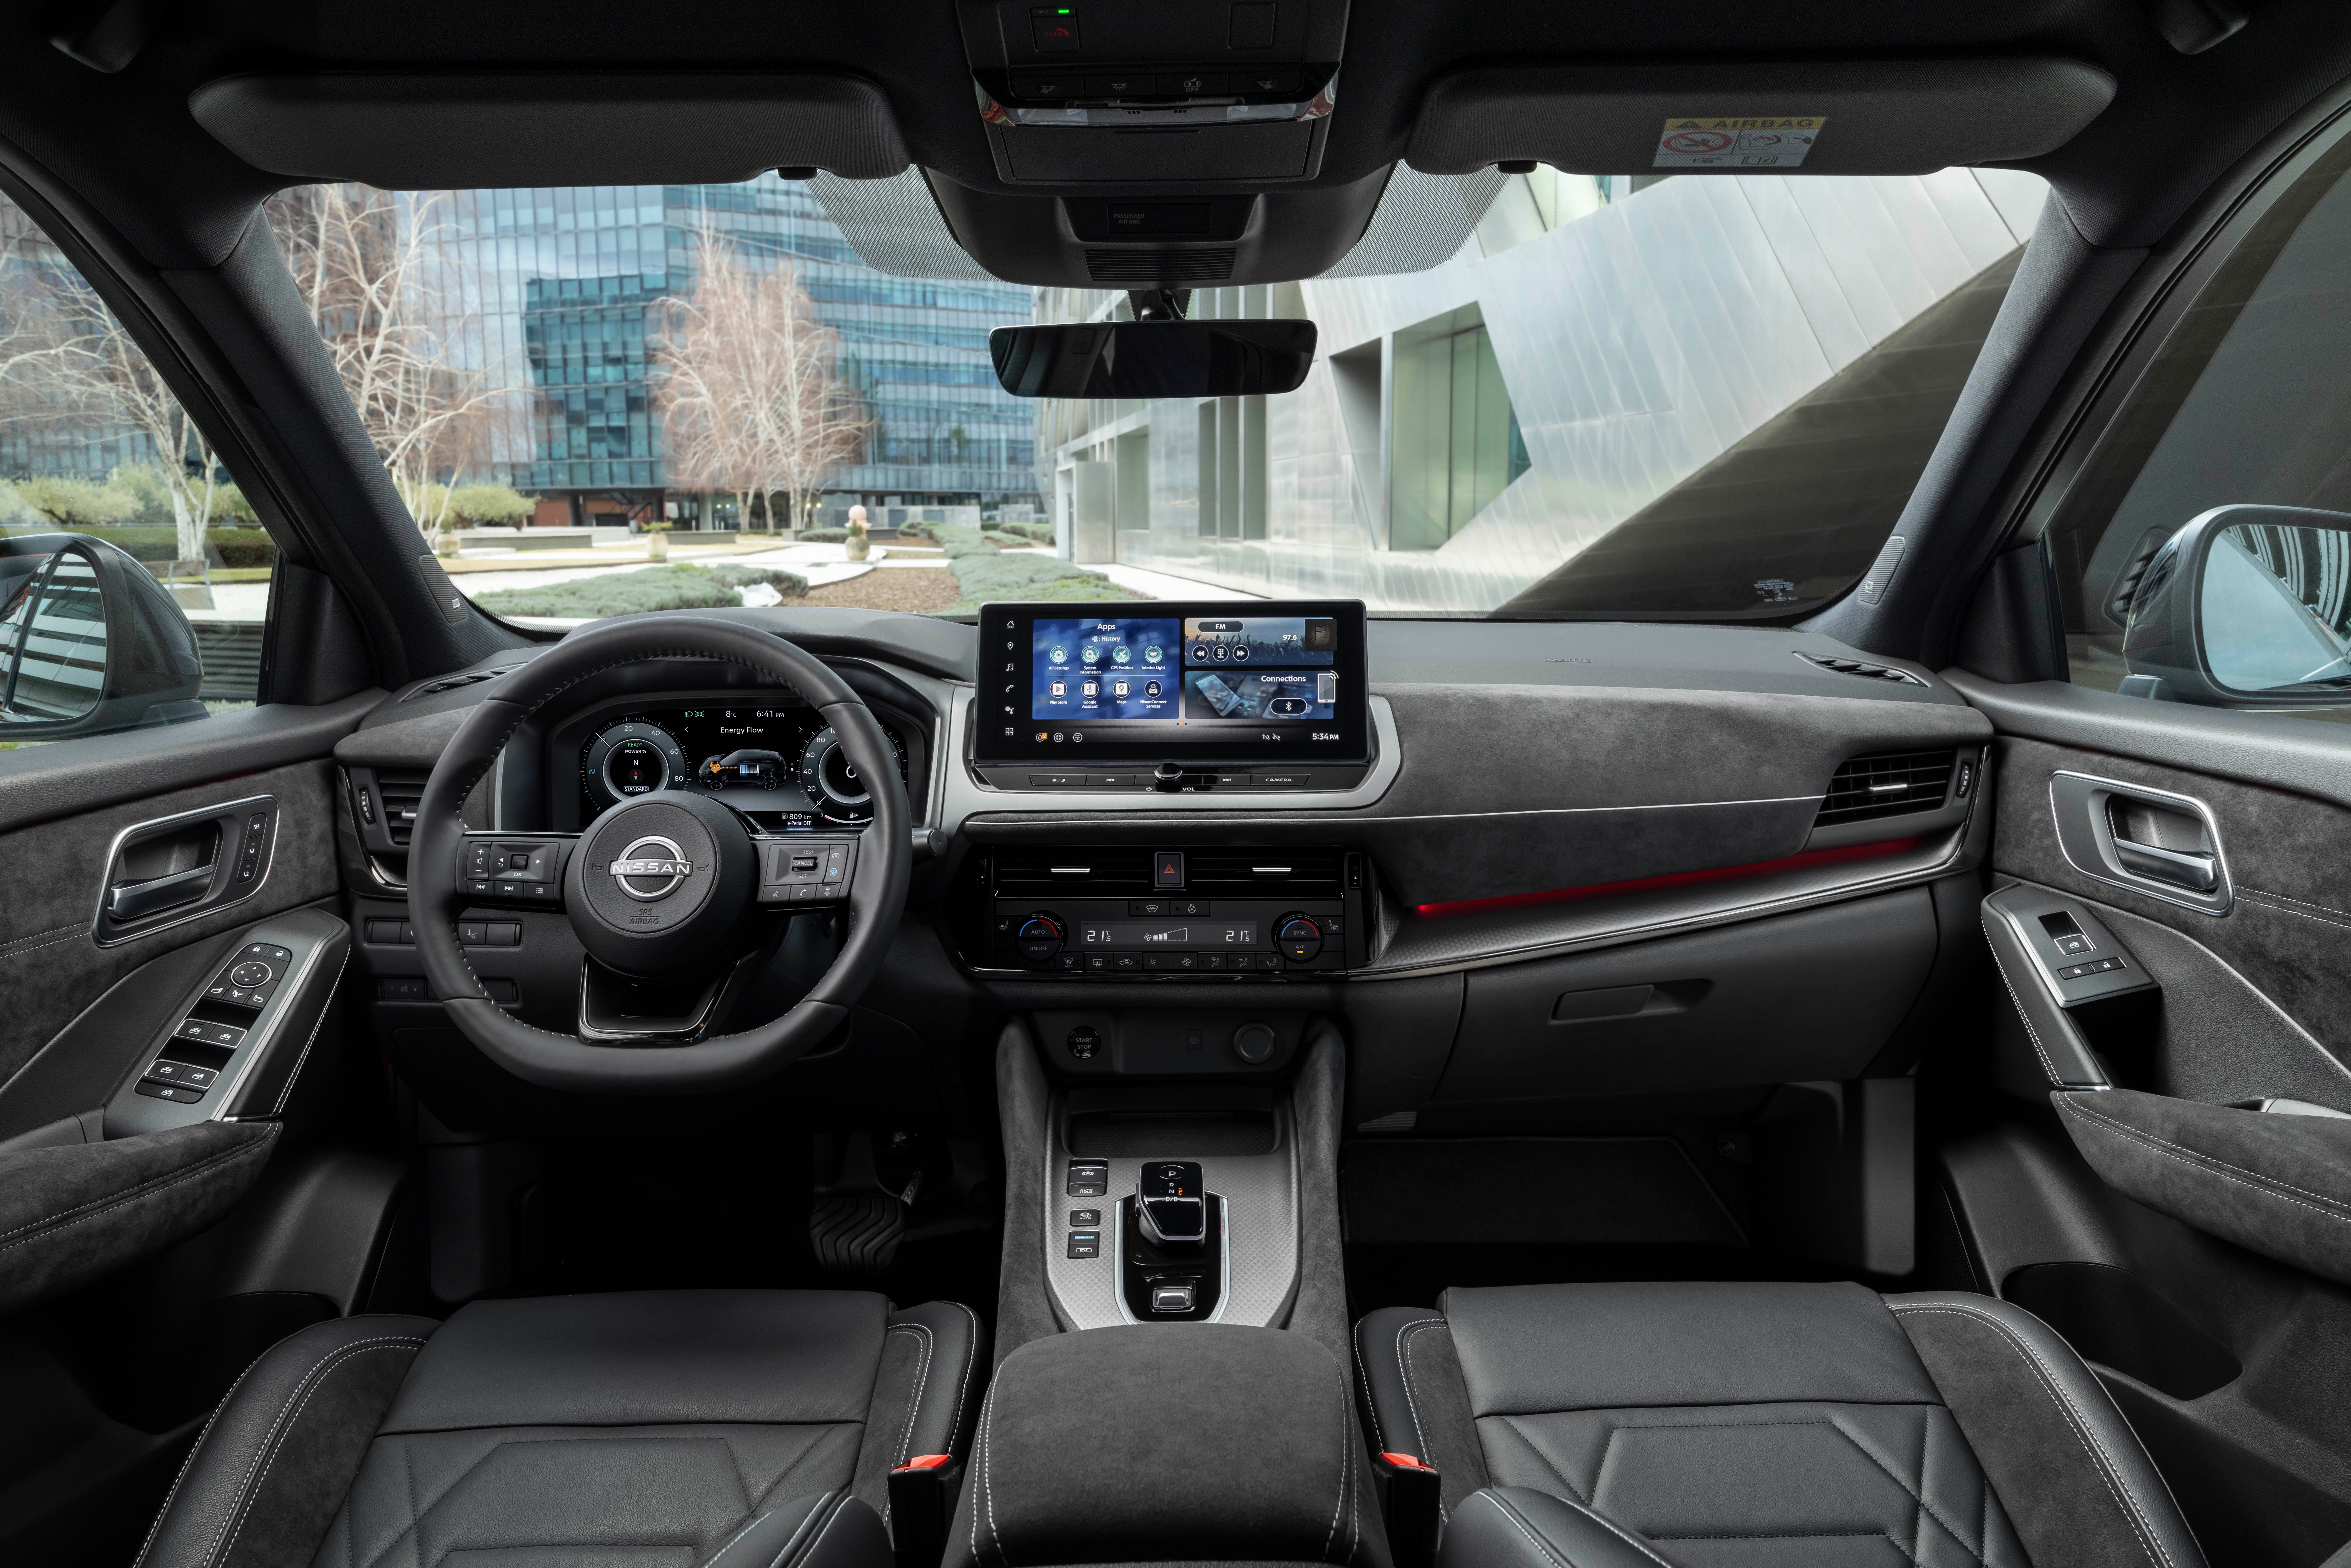 The driver’s spatial awareness is enhanced by 360-degree eight-point colour cameras